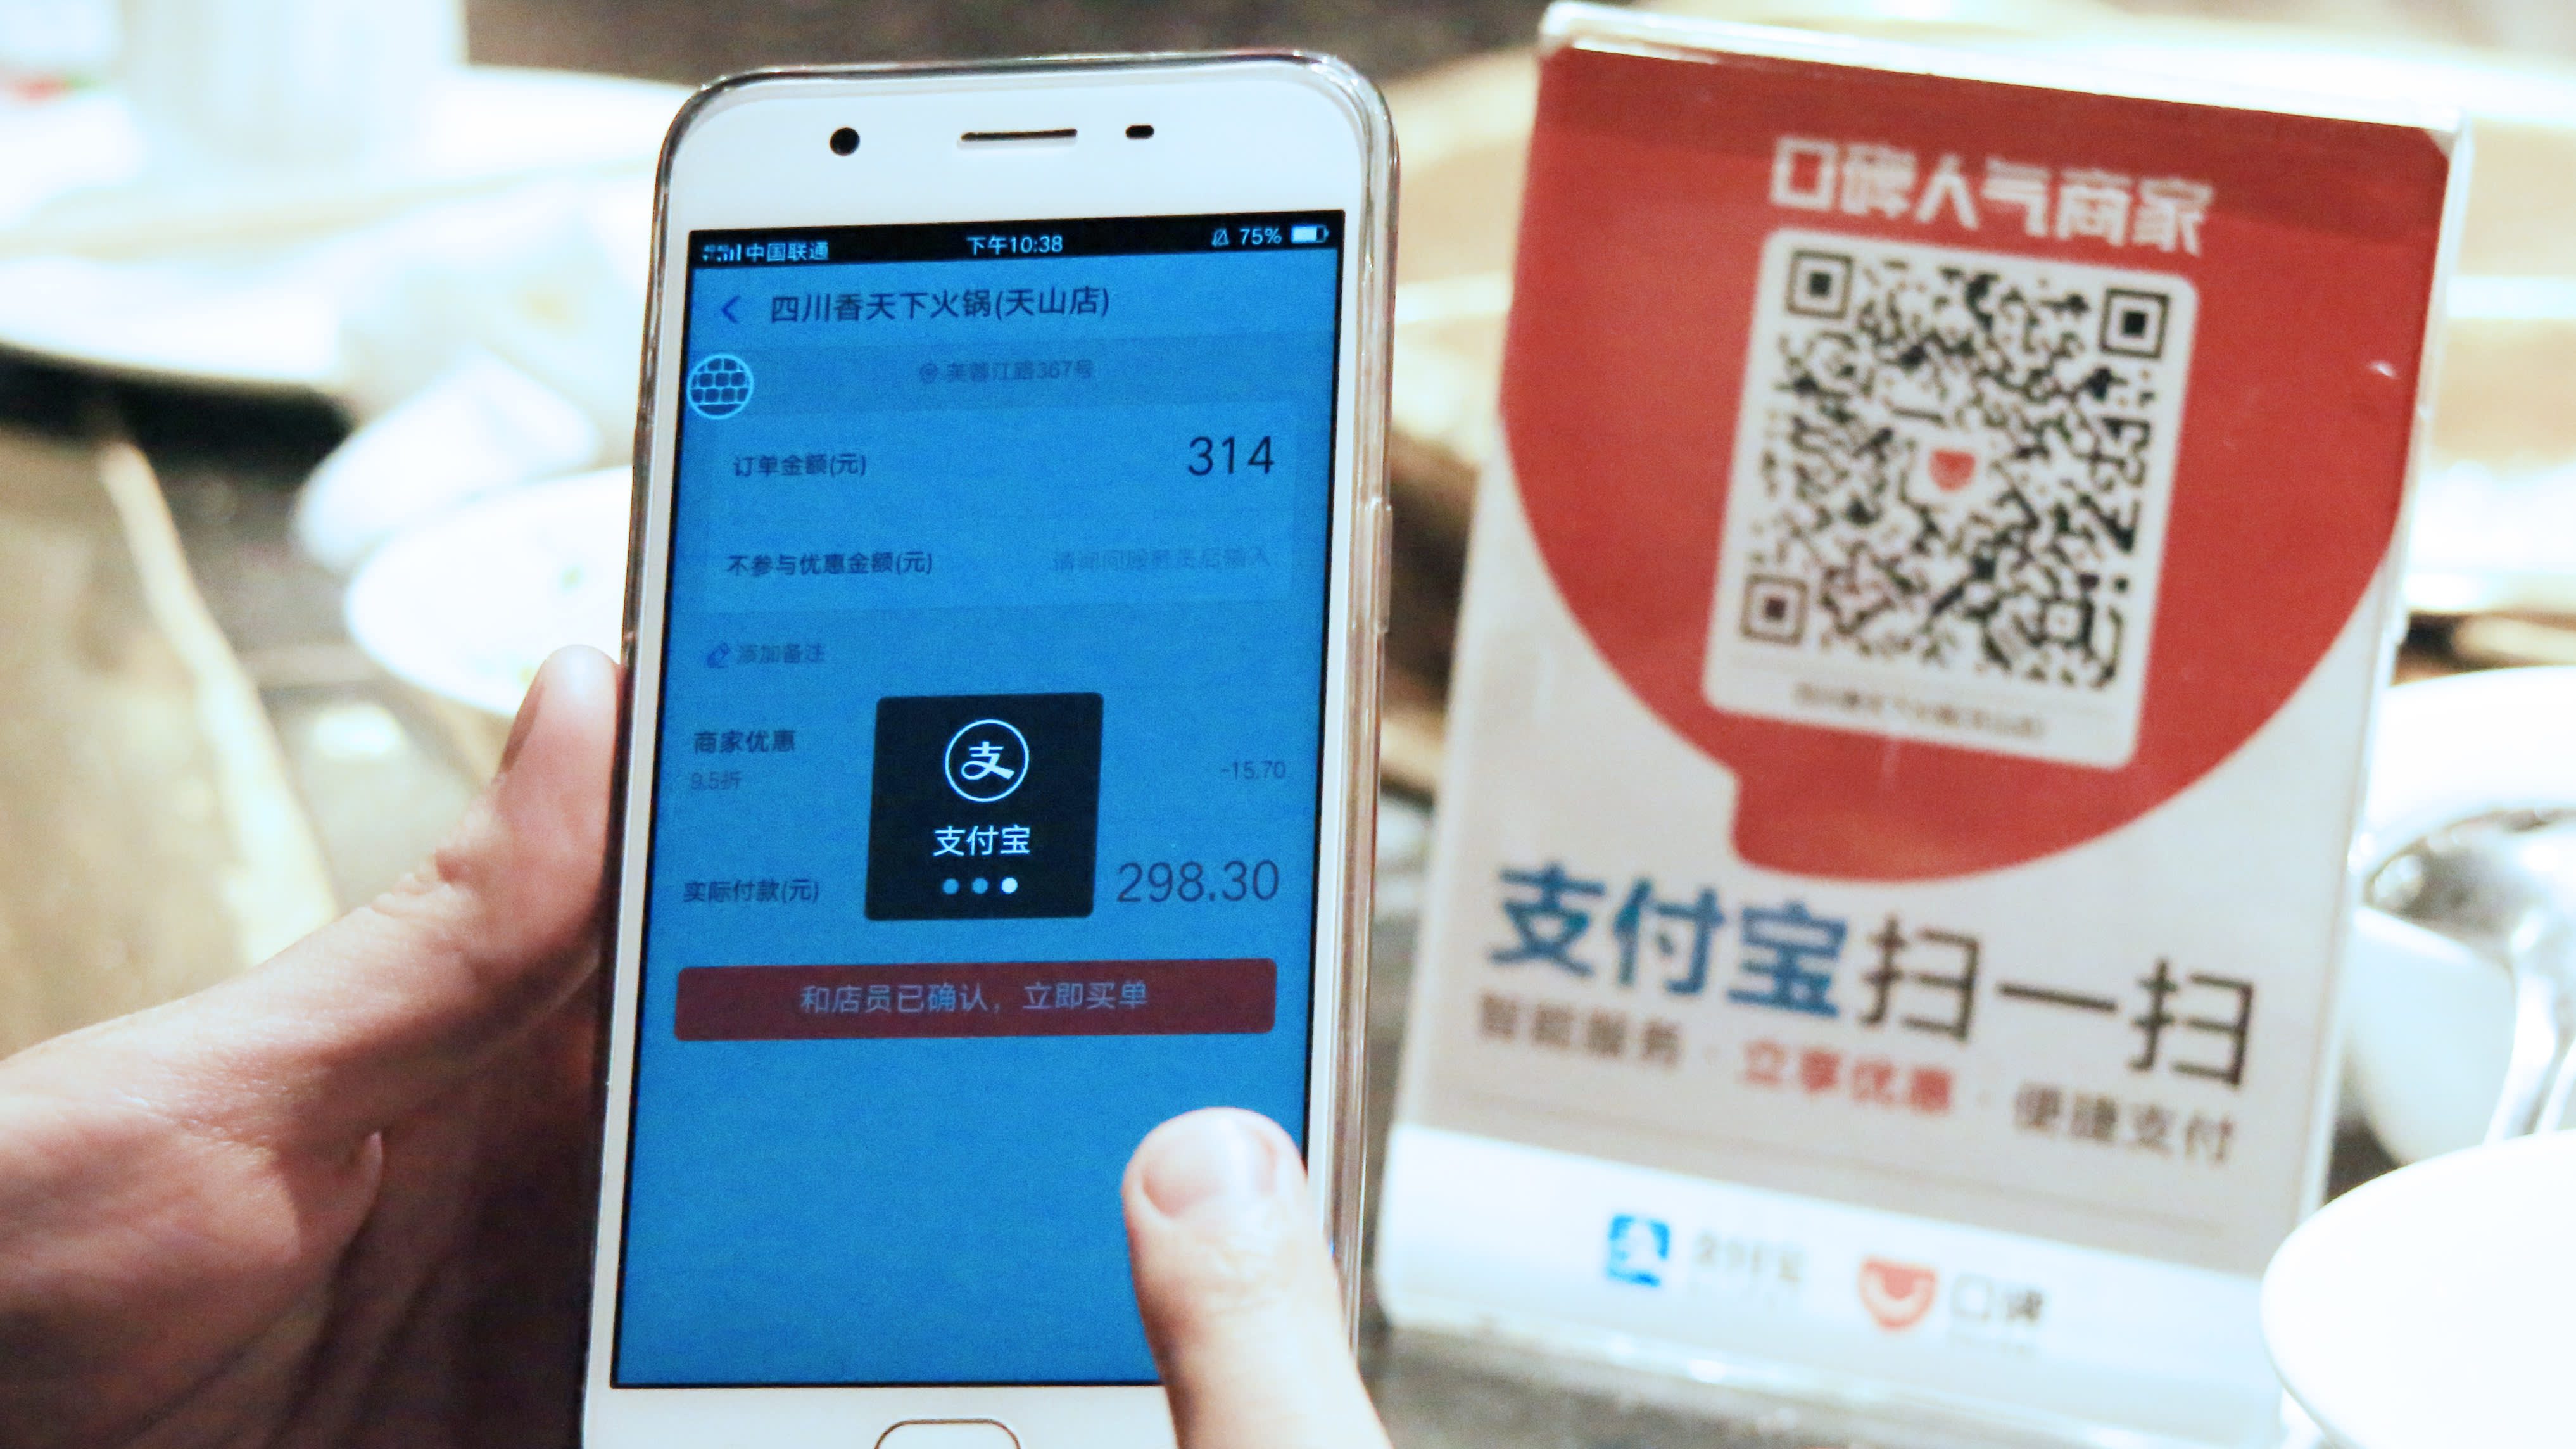 China's $25t in mobile payments transforming nation's services